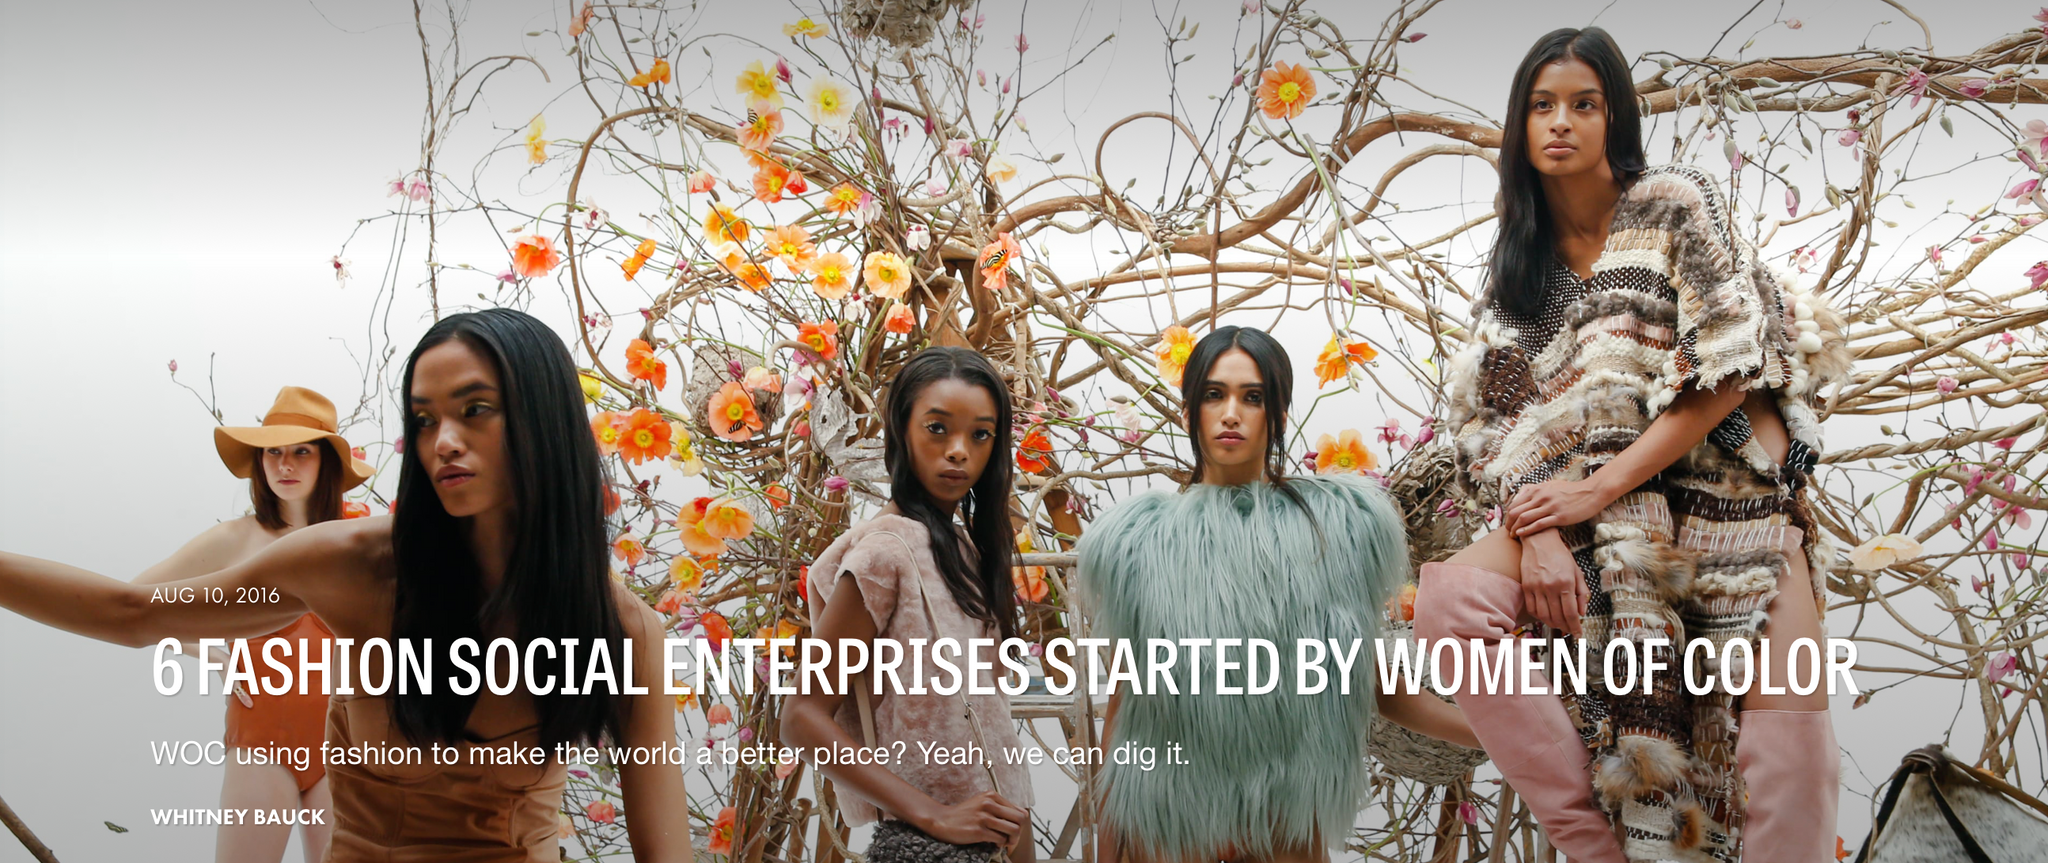 FASHIONISTA: 6 FASHION SOCIAL ENTERPRISES STARTED BY WOMEN OF COLOR